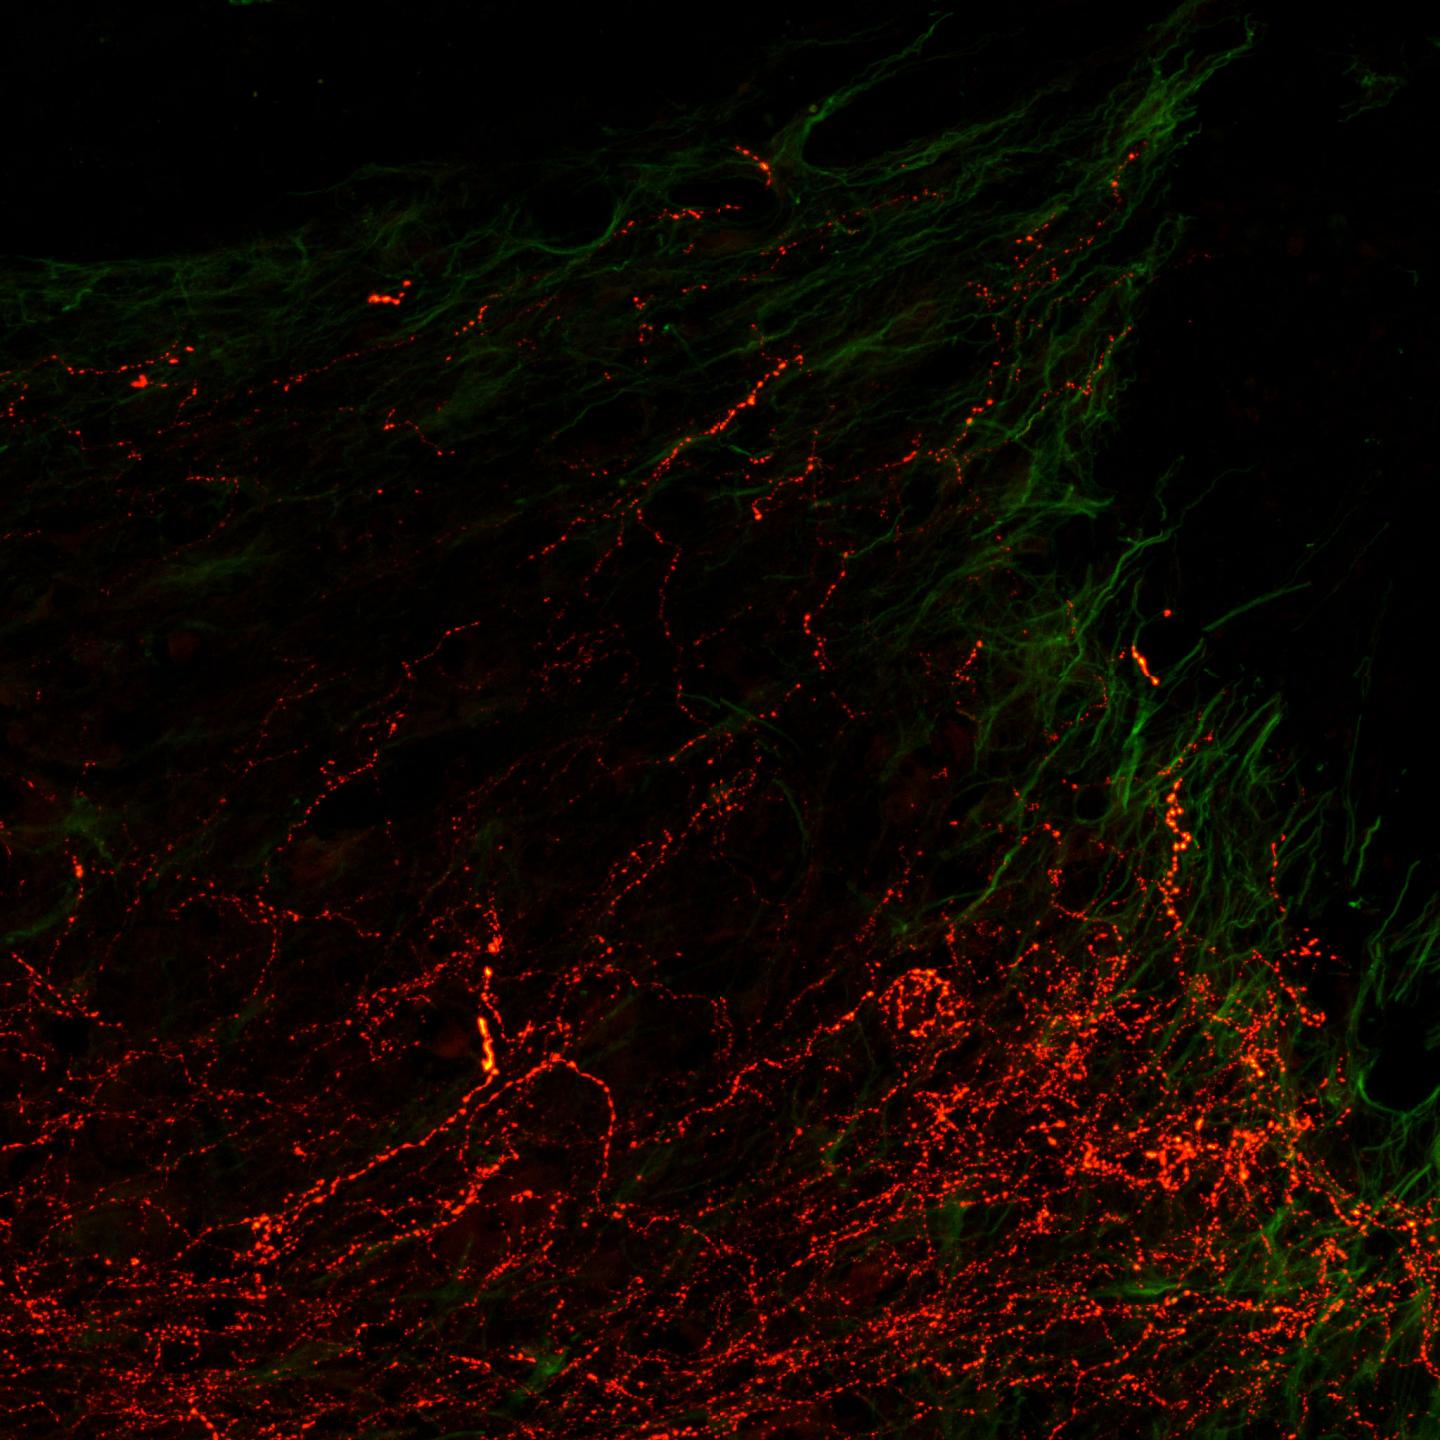 Axons at the Spinal Cord Injury Site